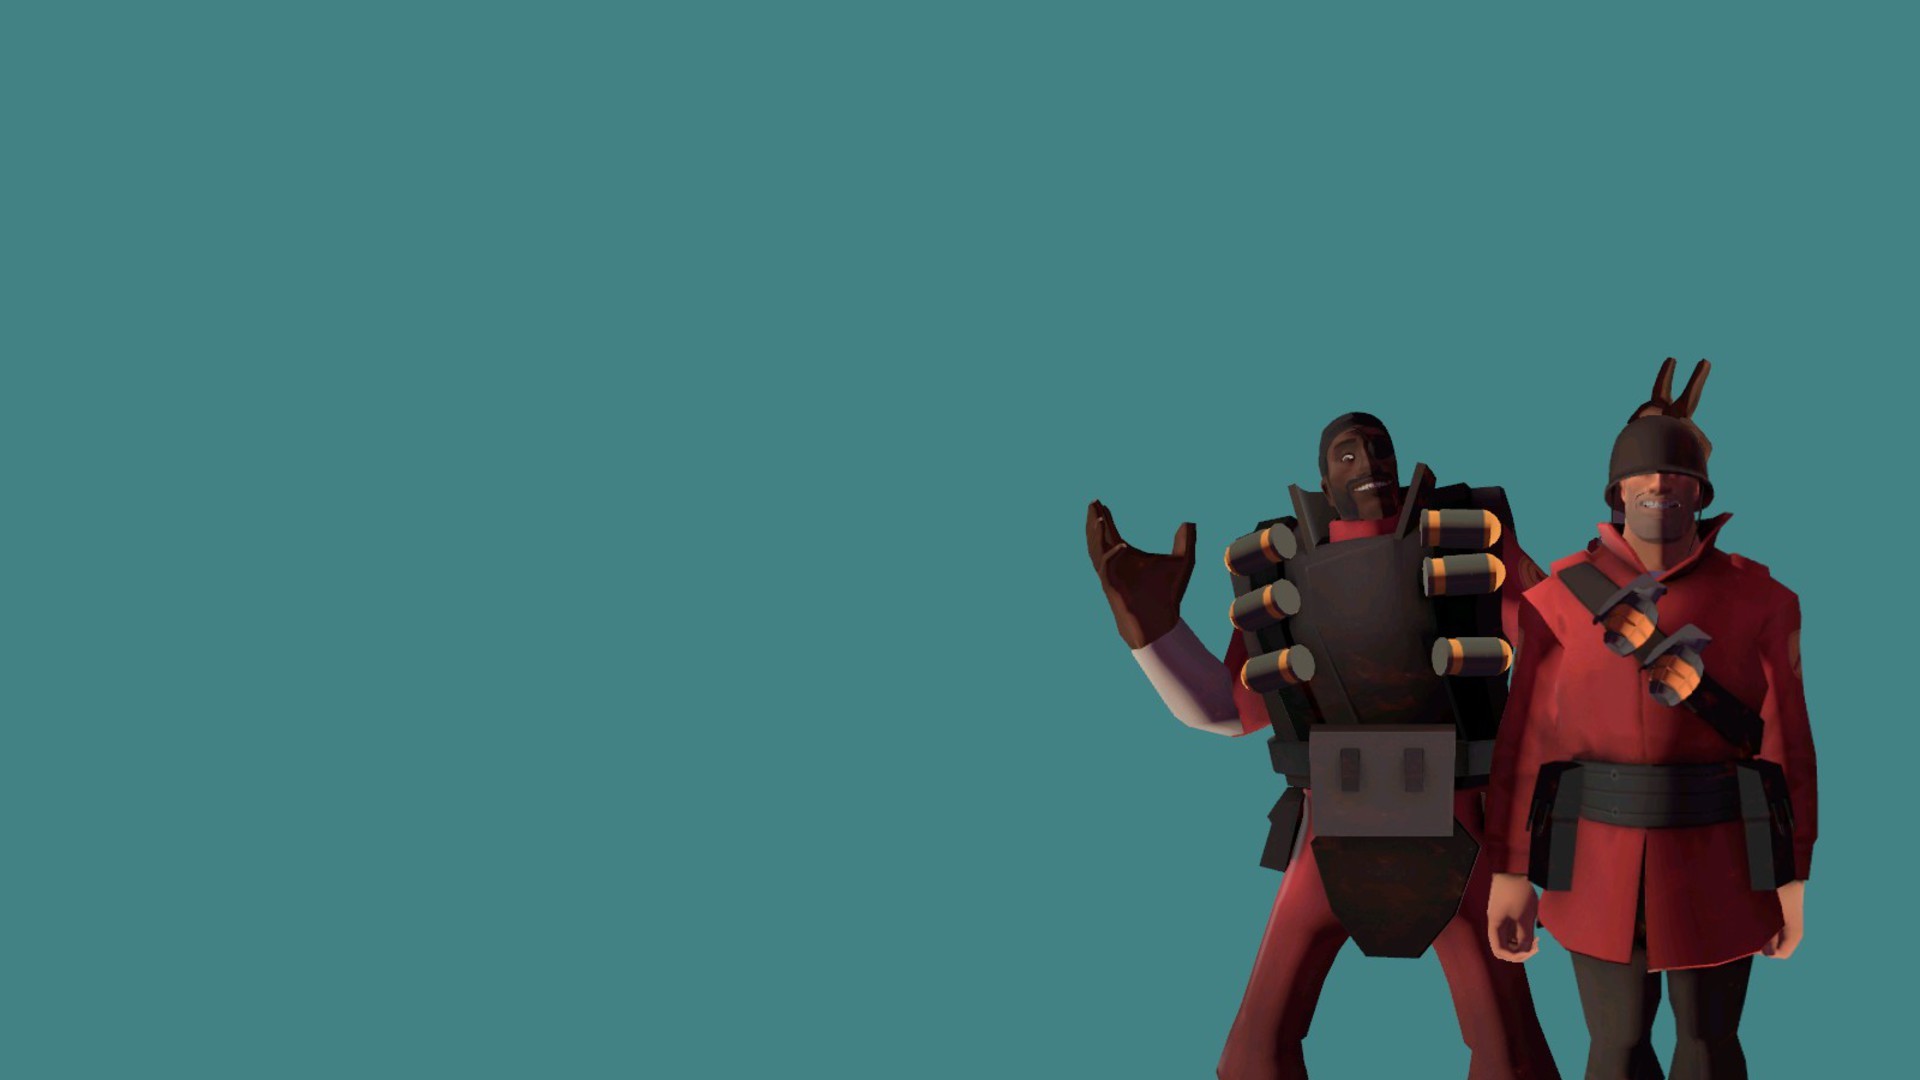 l 3xl team fortress 2 backgrounds